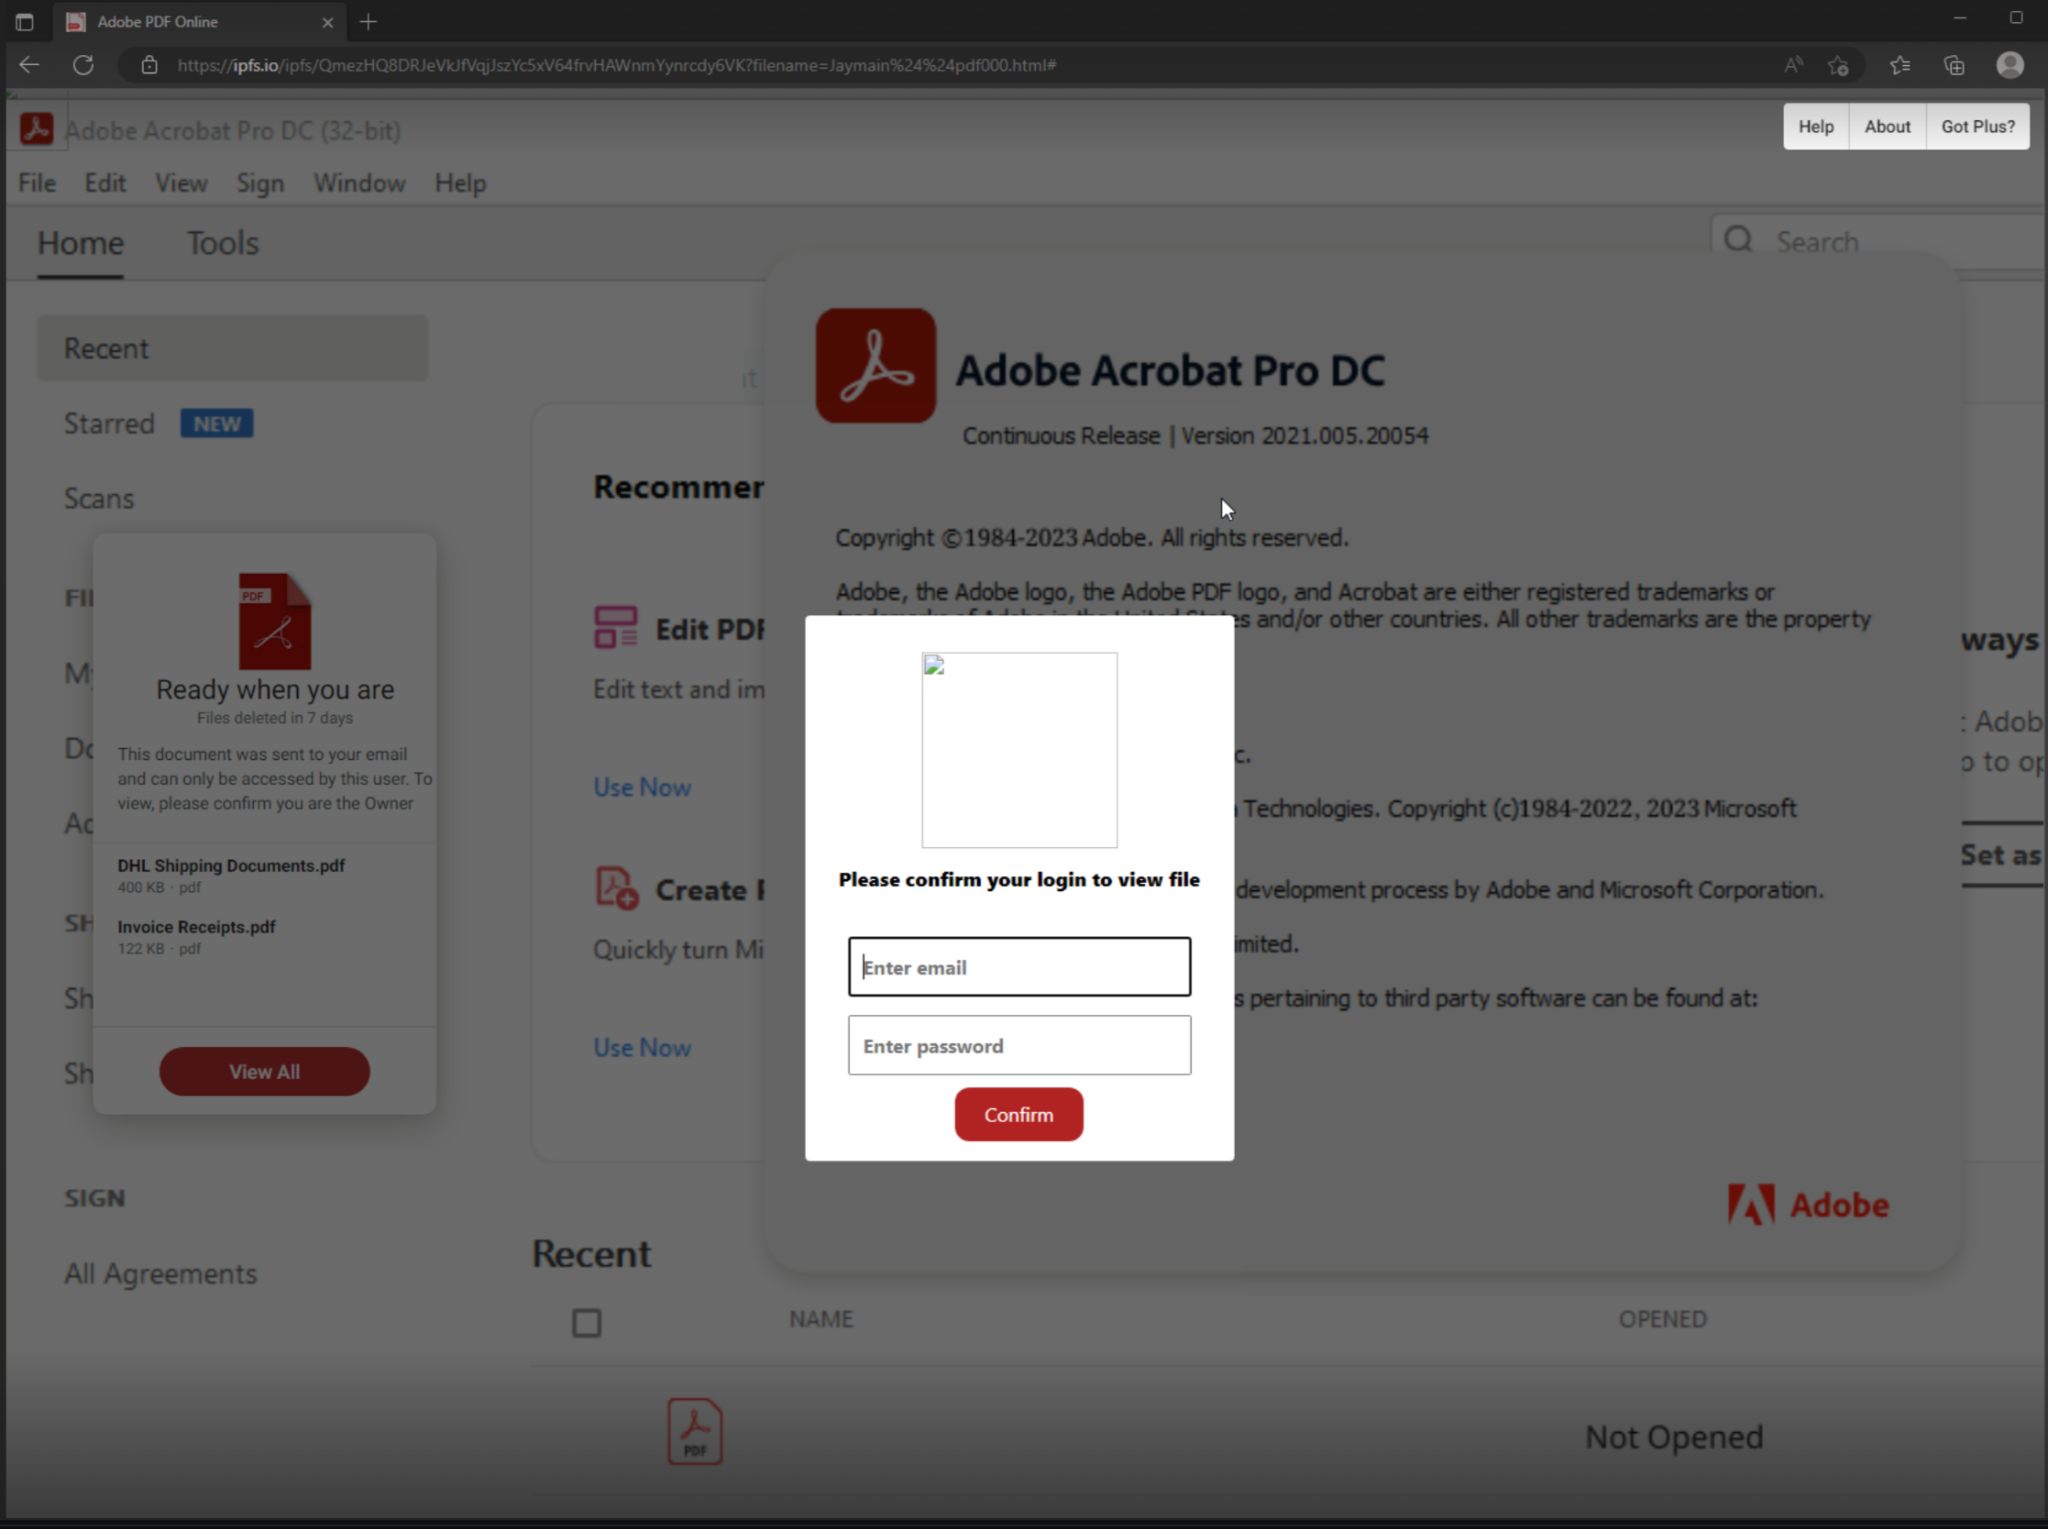 Image 10 is a screenshot of an IPFS phishing link. This is also from the same attachment as the DHL themed phishing lure. A pop-up shows a broken image as well as a form field for email and password, and a confirmation button.